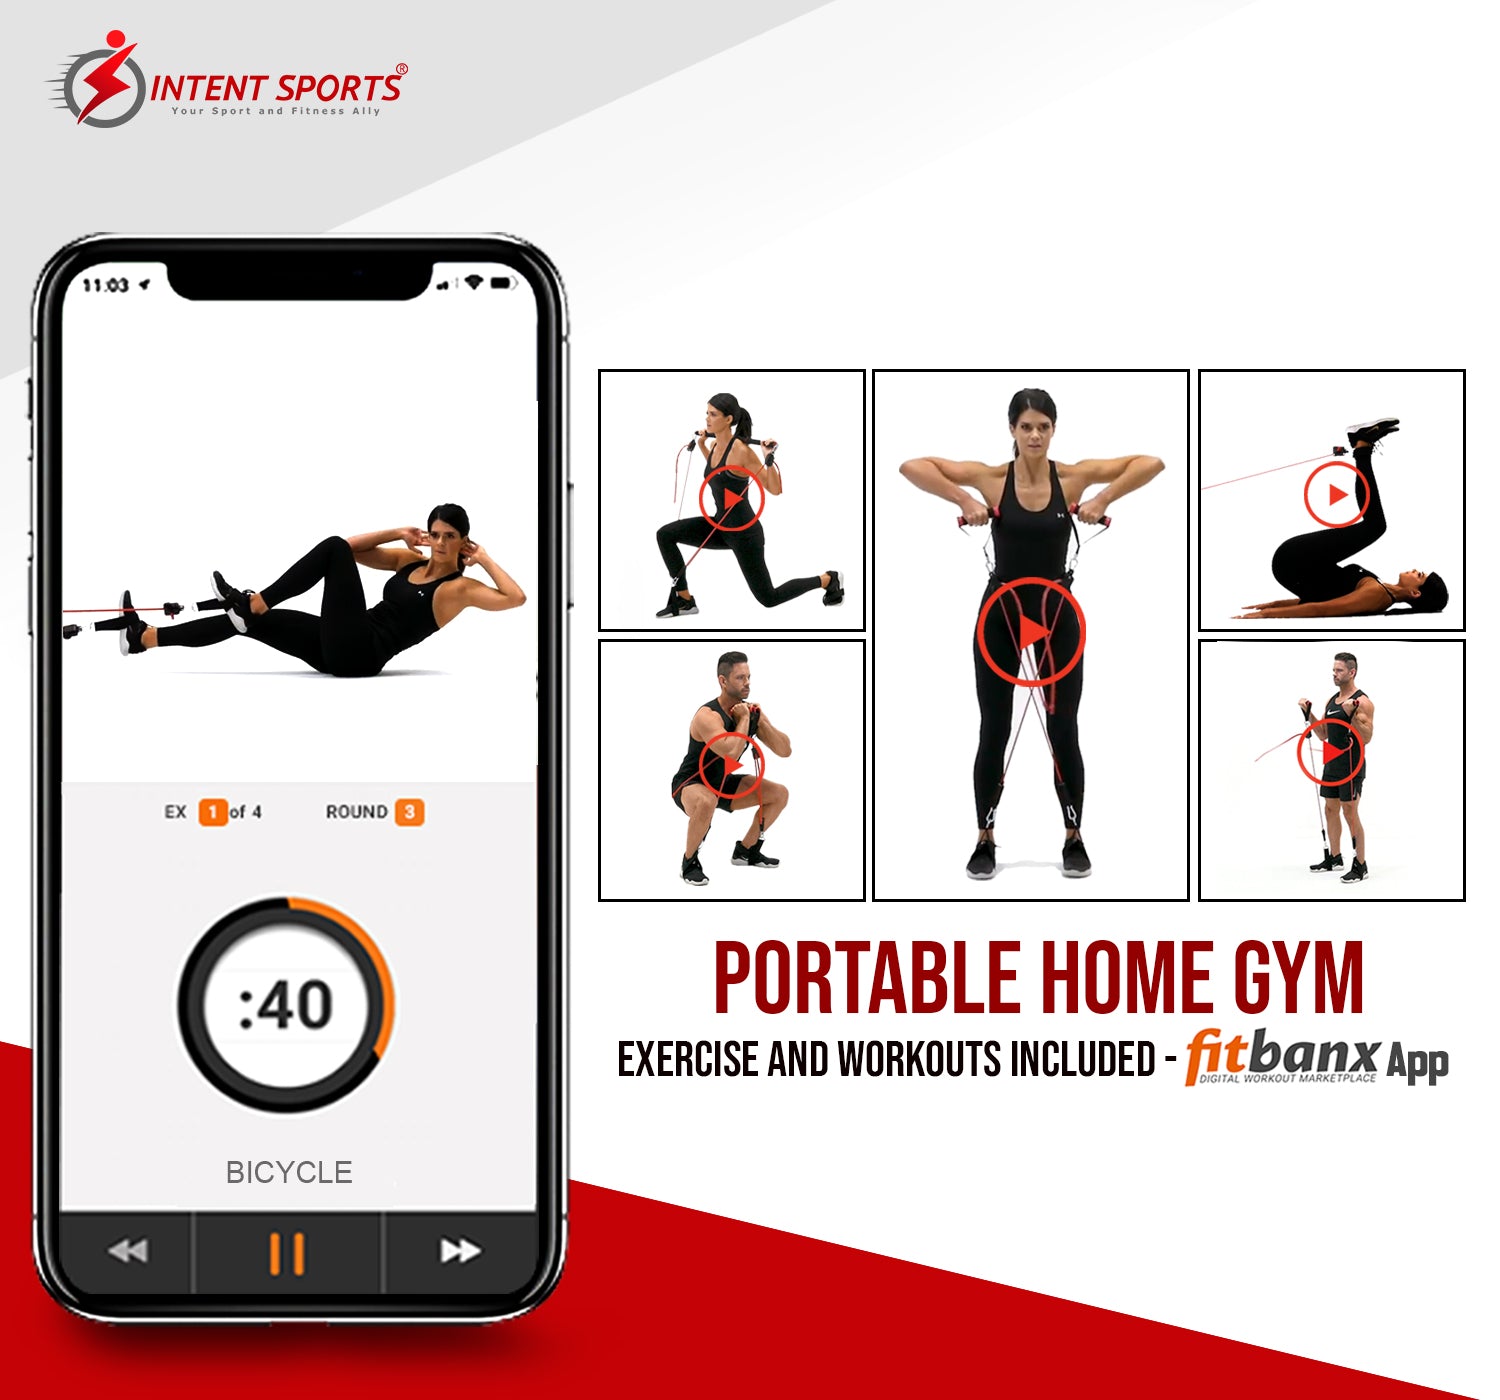 Home Workout Equipment for Women. Home Gym Equipment. Home Exercise  Equipment Women. Portable Workout Home. Total Body Workout. Travel Gym.  Crossfit